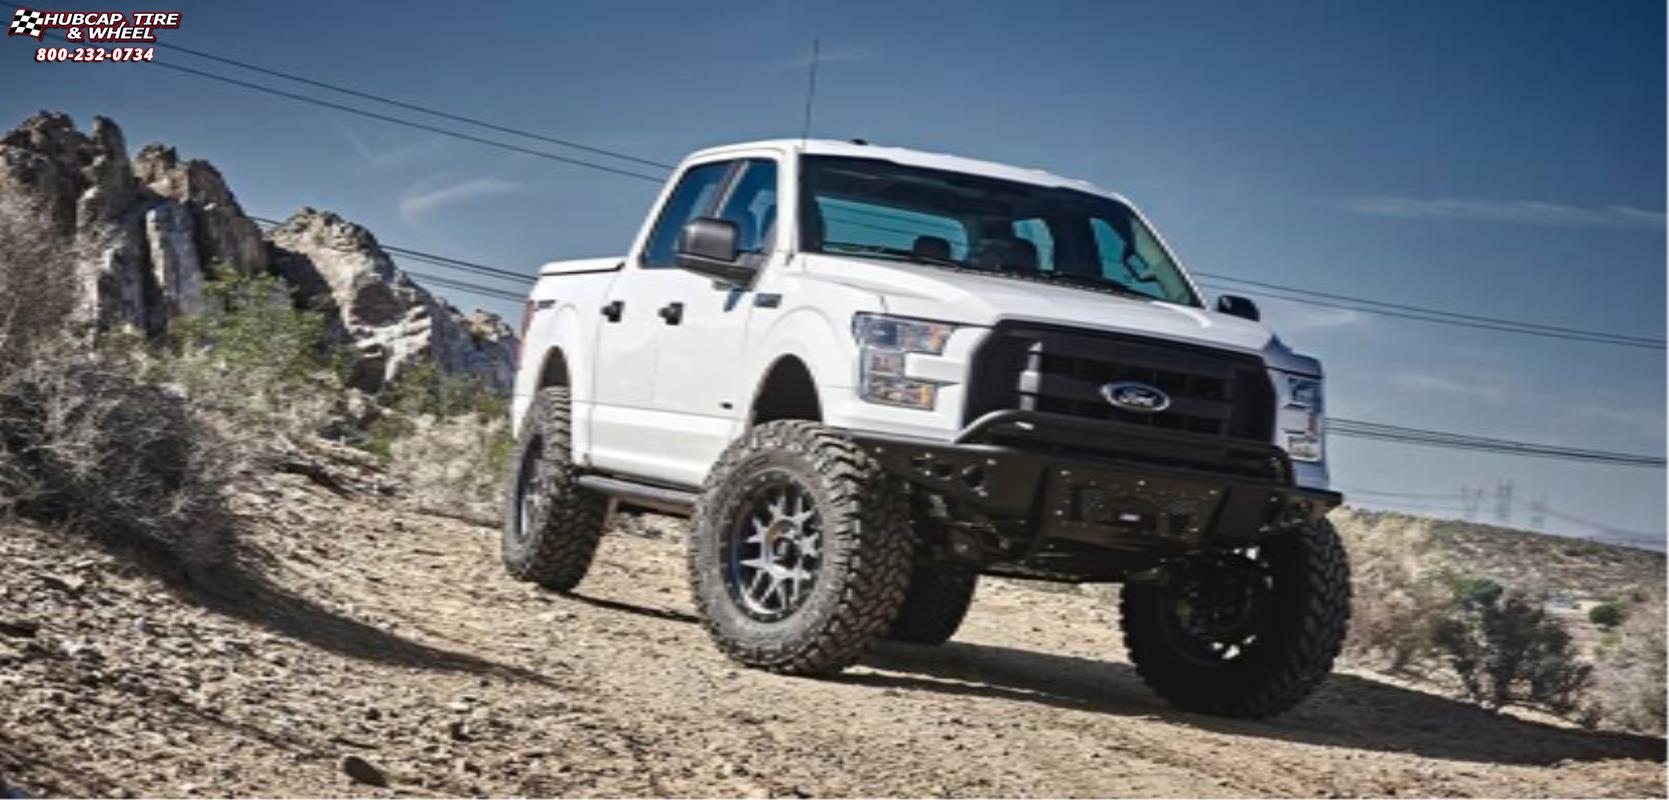 vehicle gallery/ford f 150 xd series xd127 bully x  Matte Gray and Black Ring wheels and rims